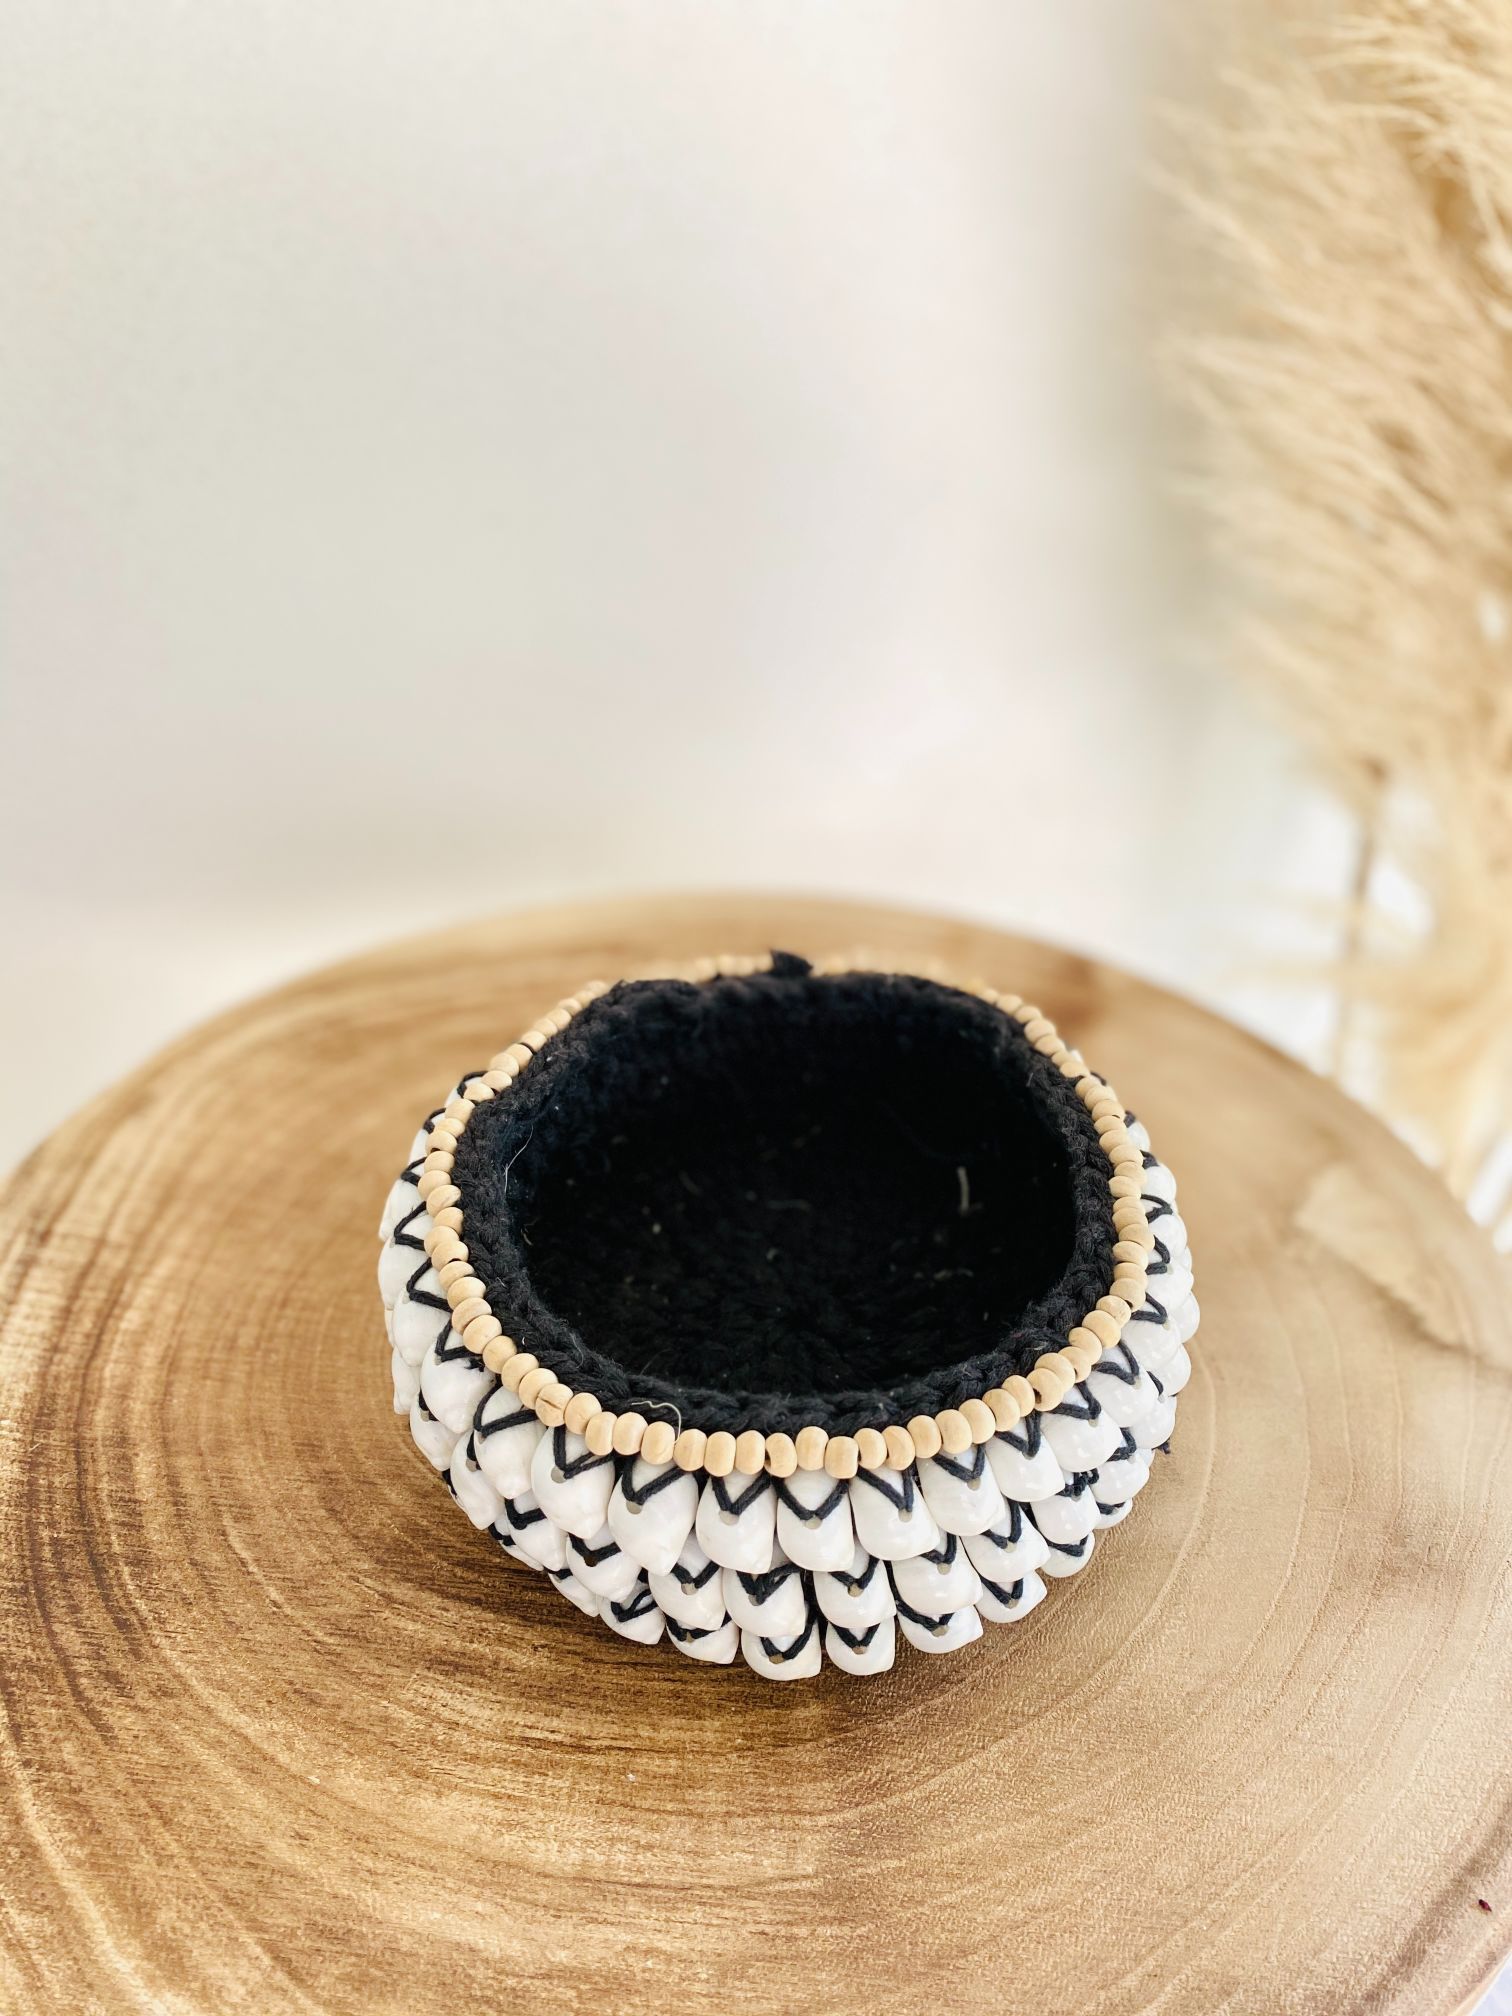 MINI BLACK BOHO WOVEN TRAY WITH SHELL BEAD ACCENT DECOR - Lustere Living